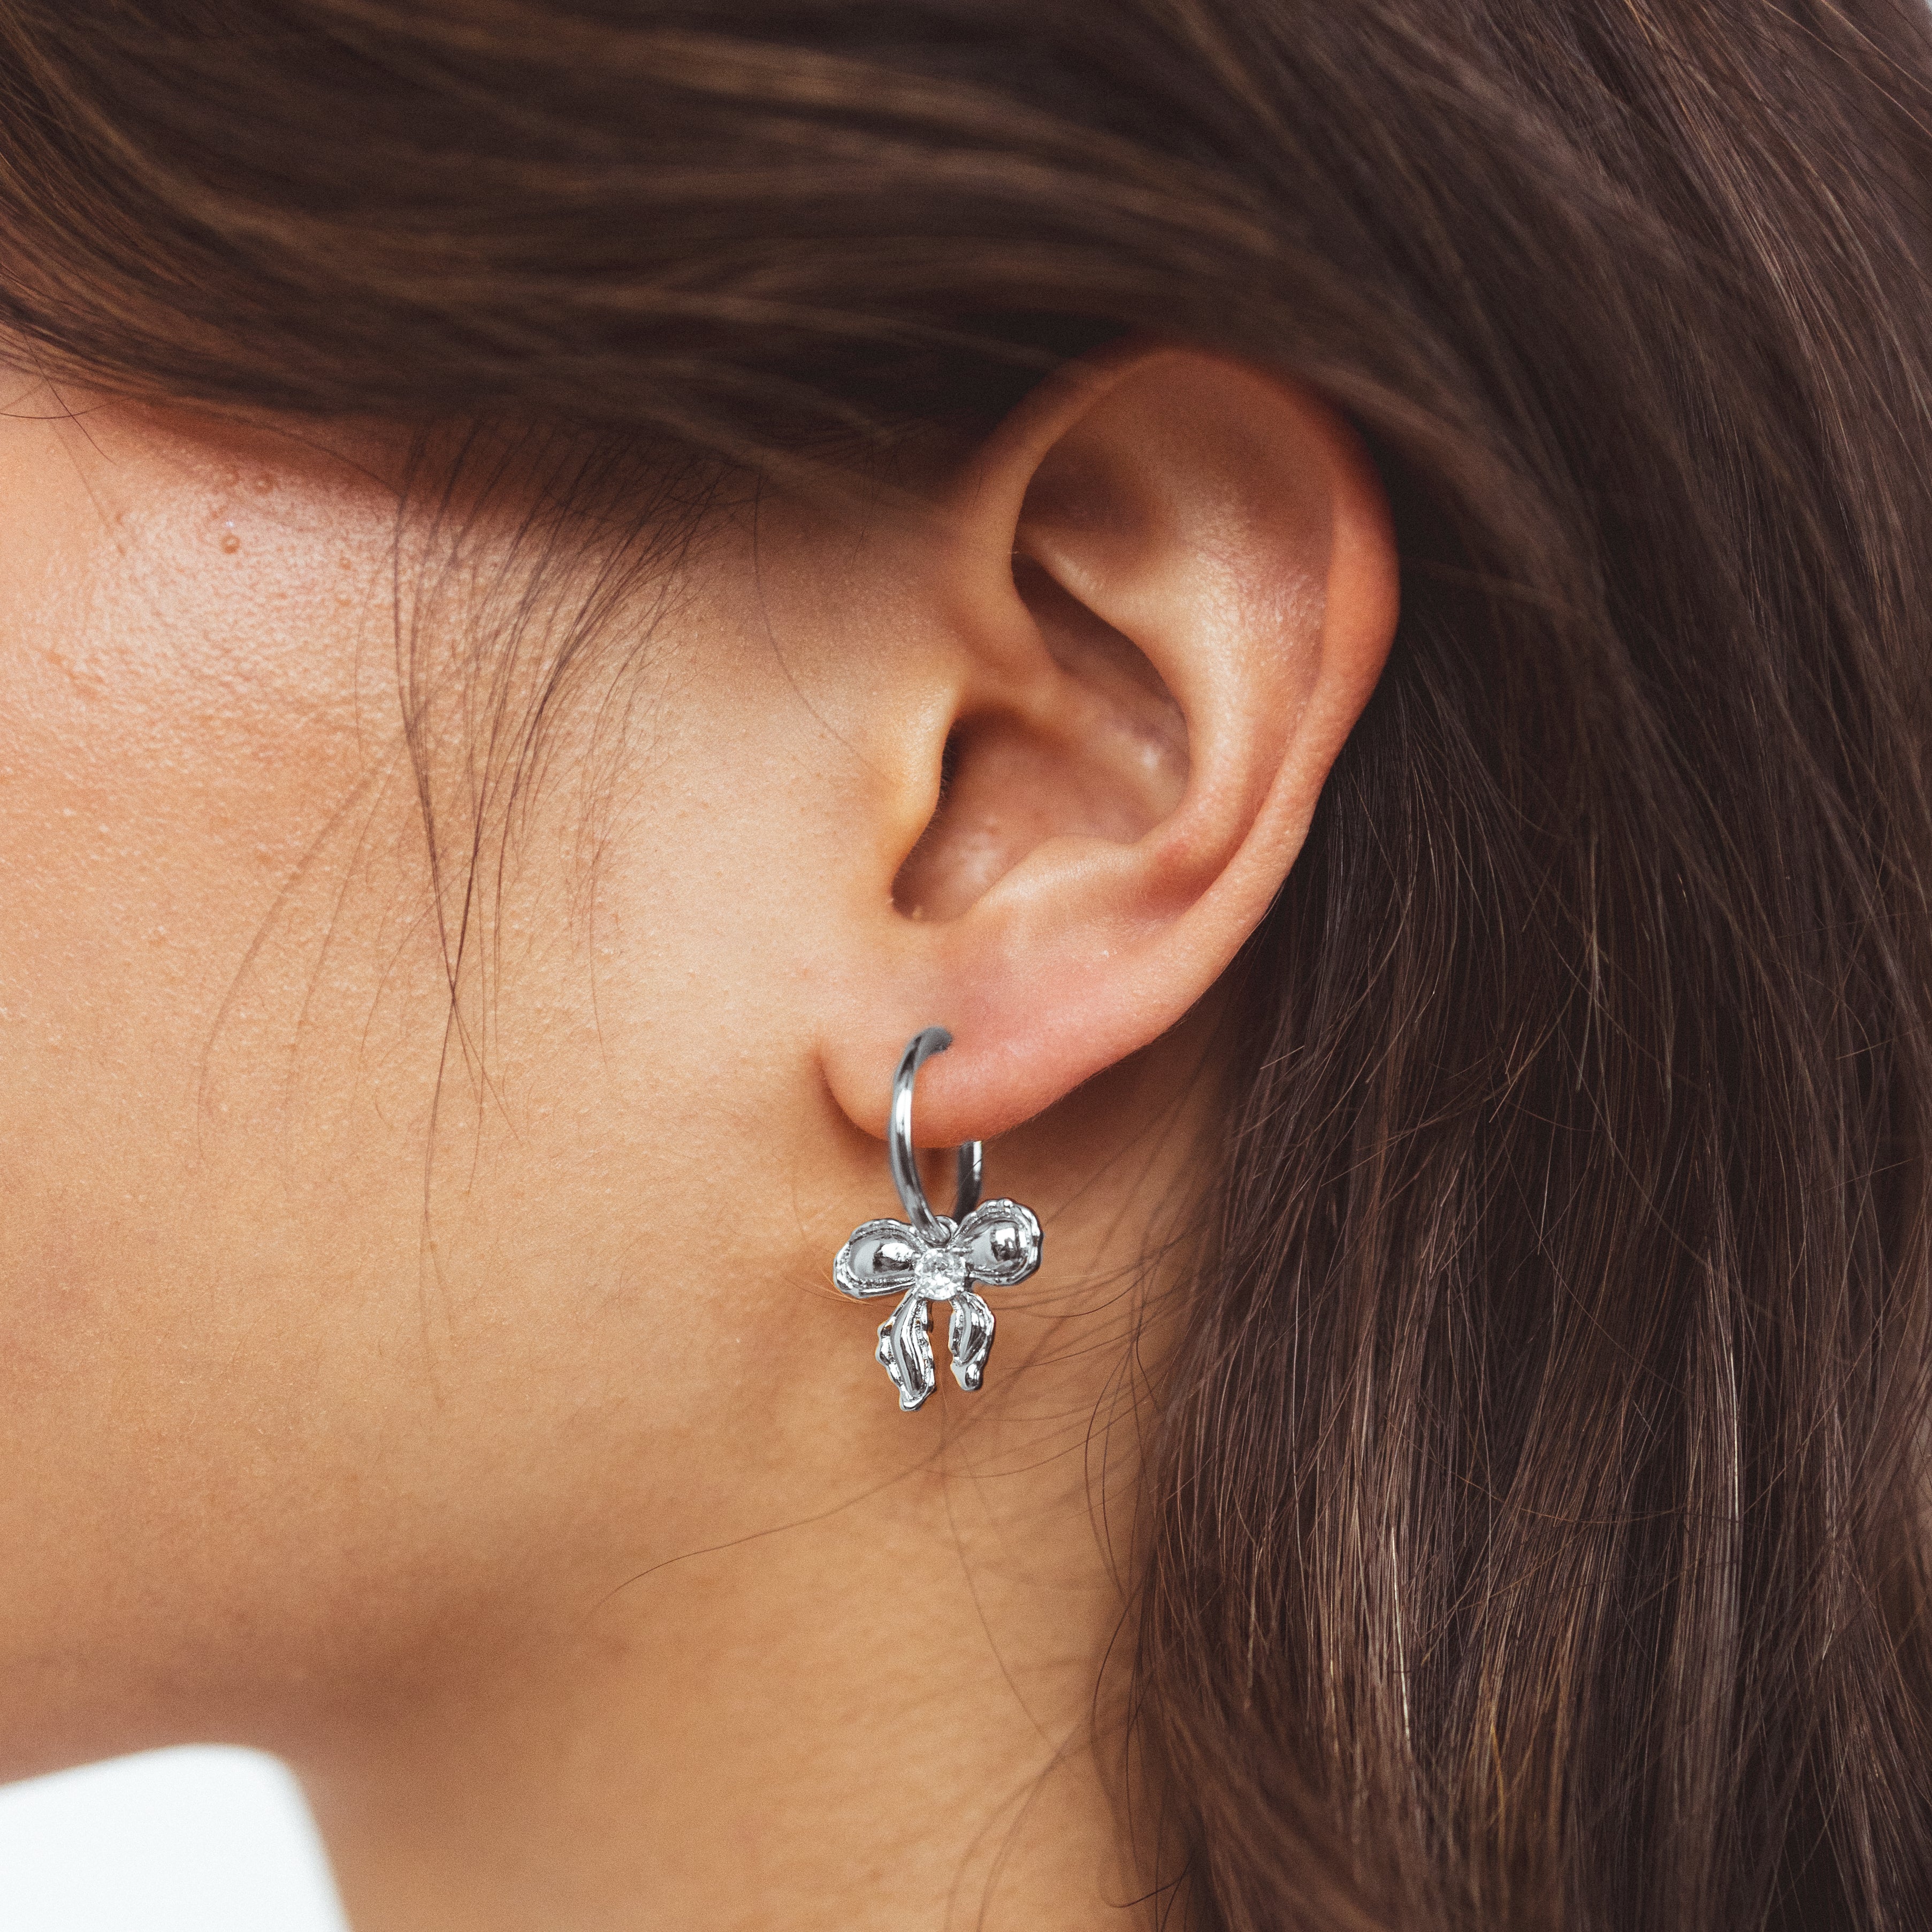 A model wearing the Ares Clip On Earrings. The sliding spring closure allows for easy adjustment to fit any ear thickness, while the gold tone copper alloy provides a secure hold. Perfect for stretched/healing ears or small/thin earlobes.